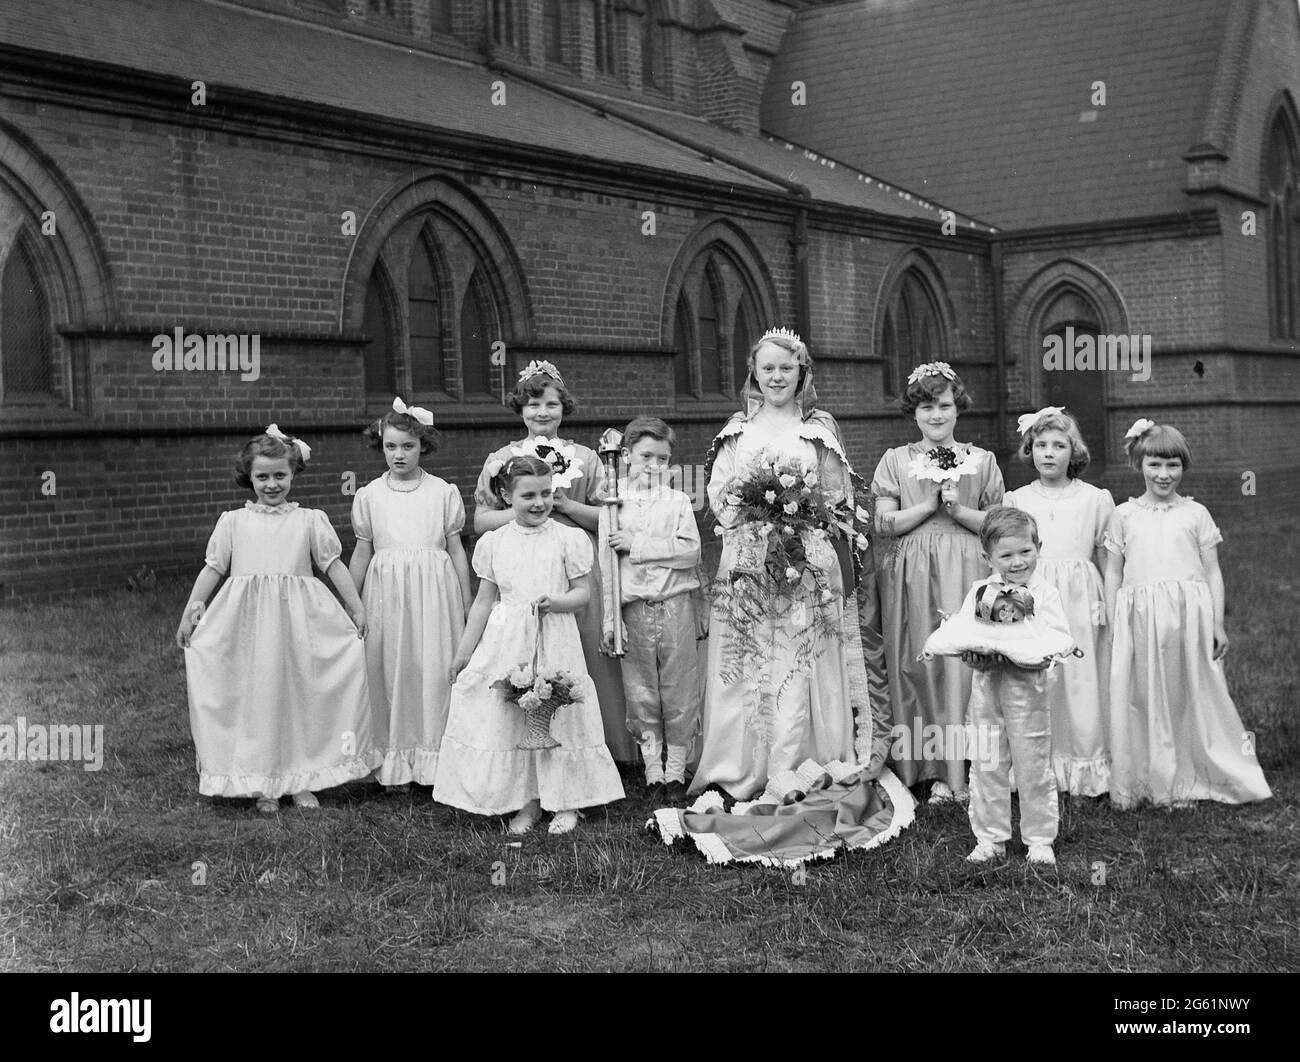 1956, historical, outside in the grounds of a church, a May Queen standing for a photo in her long gown and holding a bunch of flowers, with her entourage of helpers, young girls and two little boys, one of whom is holding a cushion with her crown on. A festival of ancient origins, held to celebrate the arrival of summer, May Day has been held in villages across Britain, with the crowning of the May Queen, a girl and a parade where she shows off her gown and crown to the local population. Stock Photo